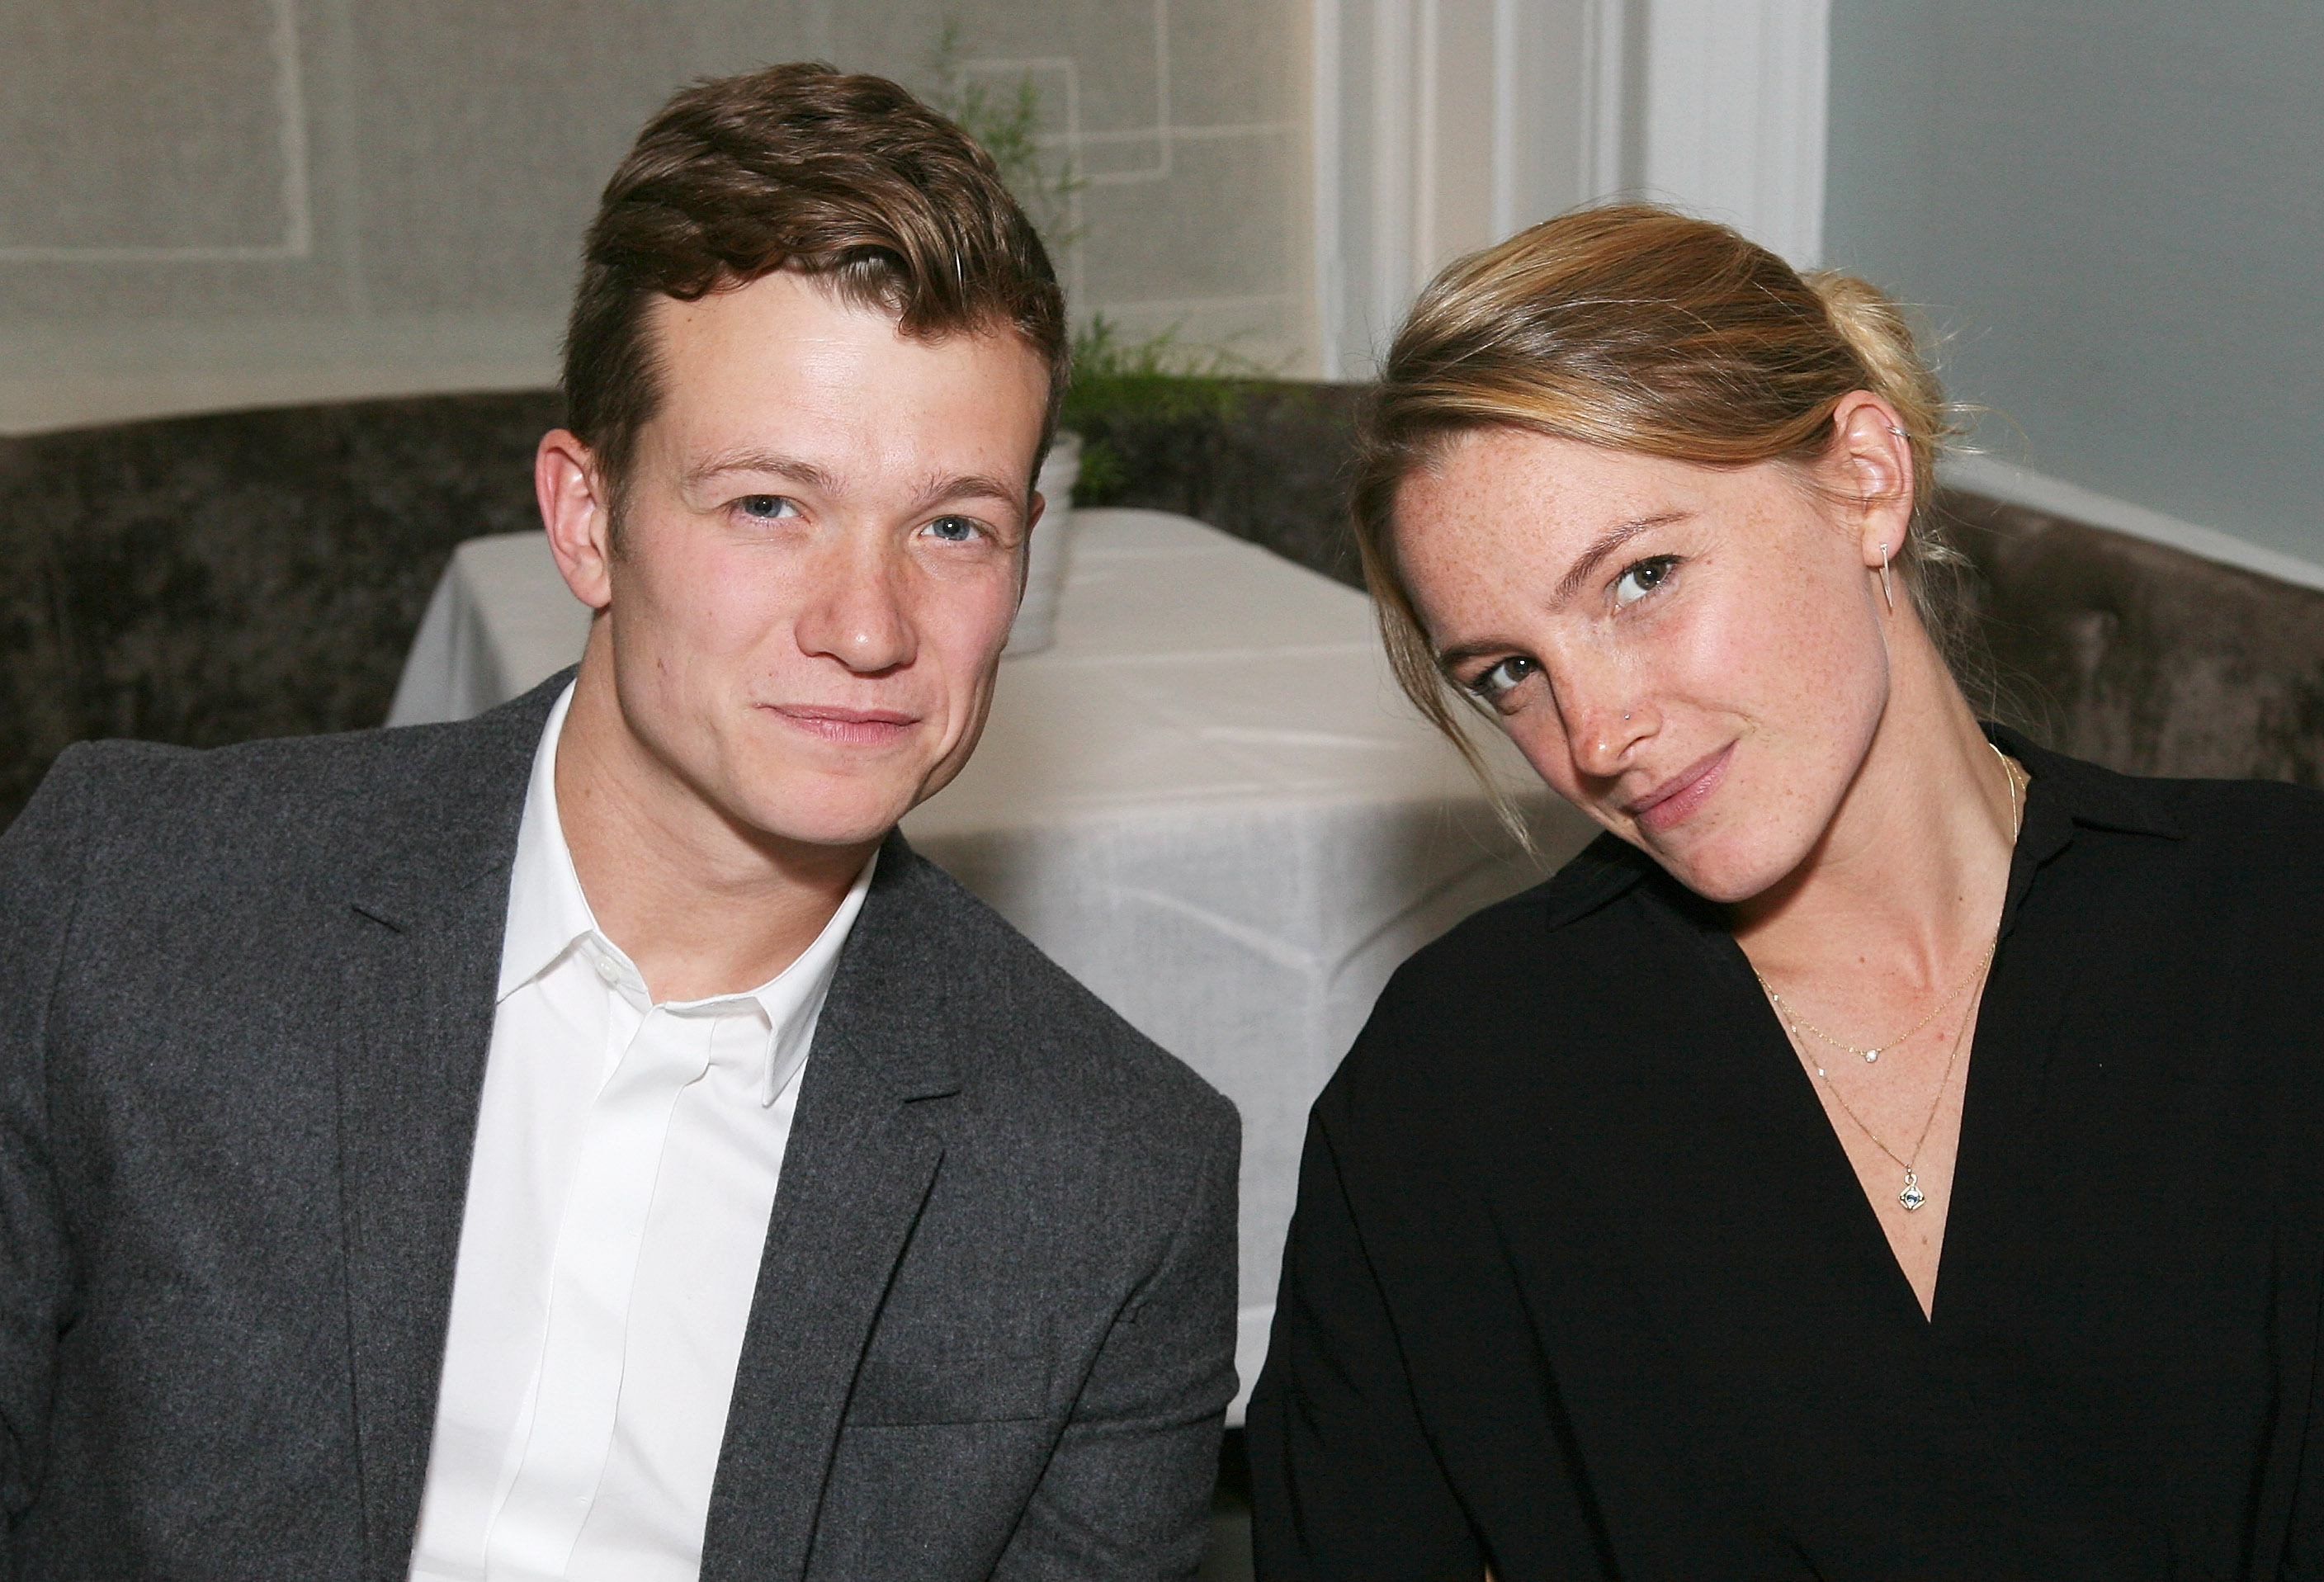 Ed Speleers und Asia Macey während des COS Dinner At Spring at Spring at Somerset House am 27. Oktober 2015 in London, England. | Quelle: Getty Images